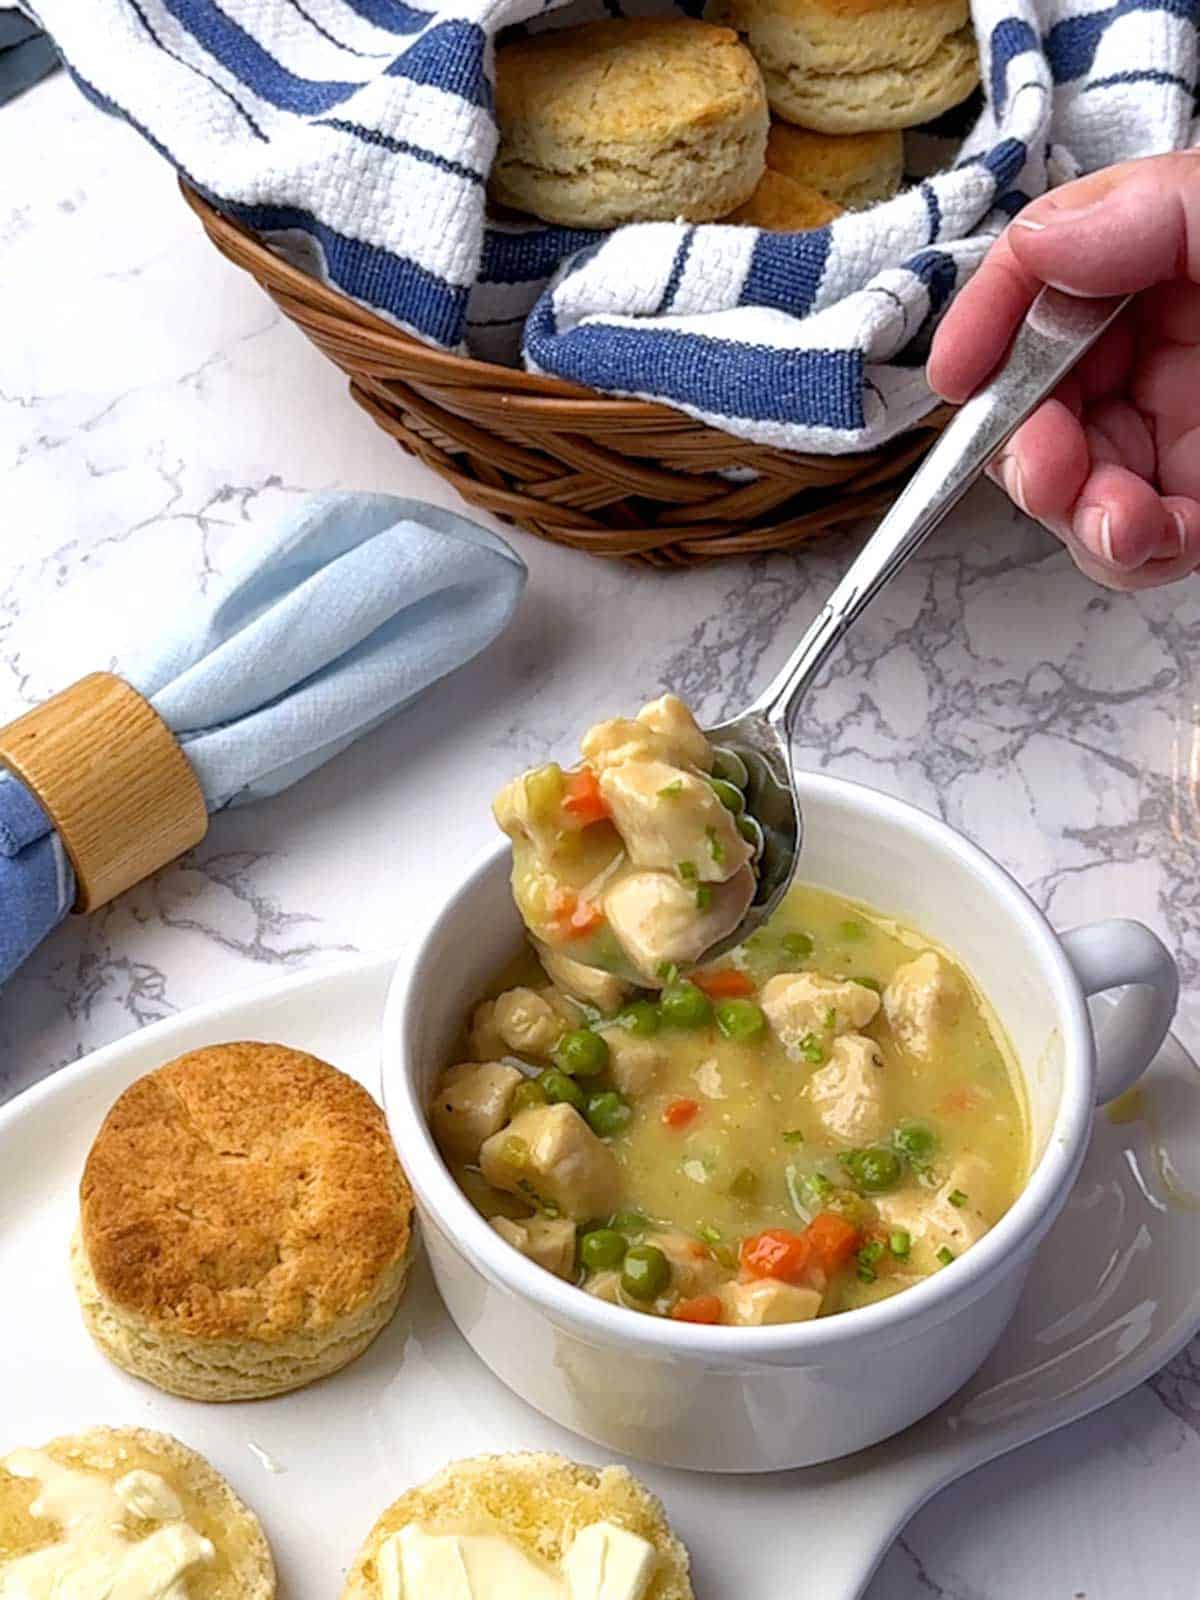 Eating the chicken stew with vegetables with biscuits on the side.